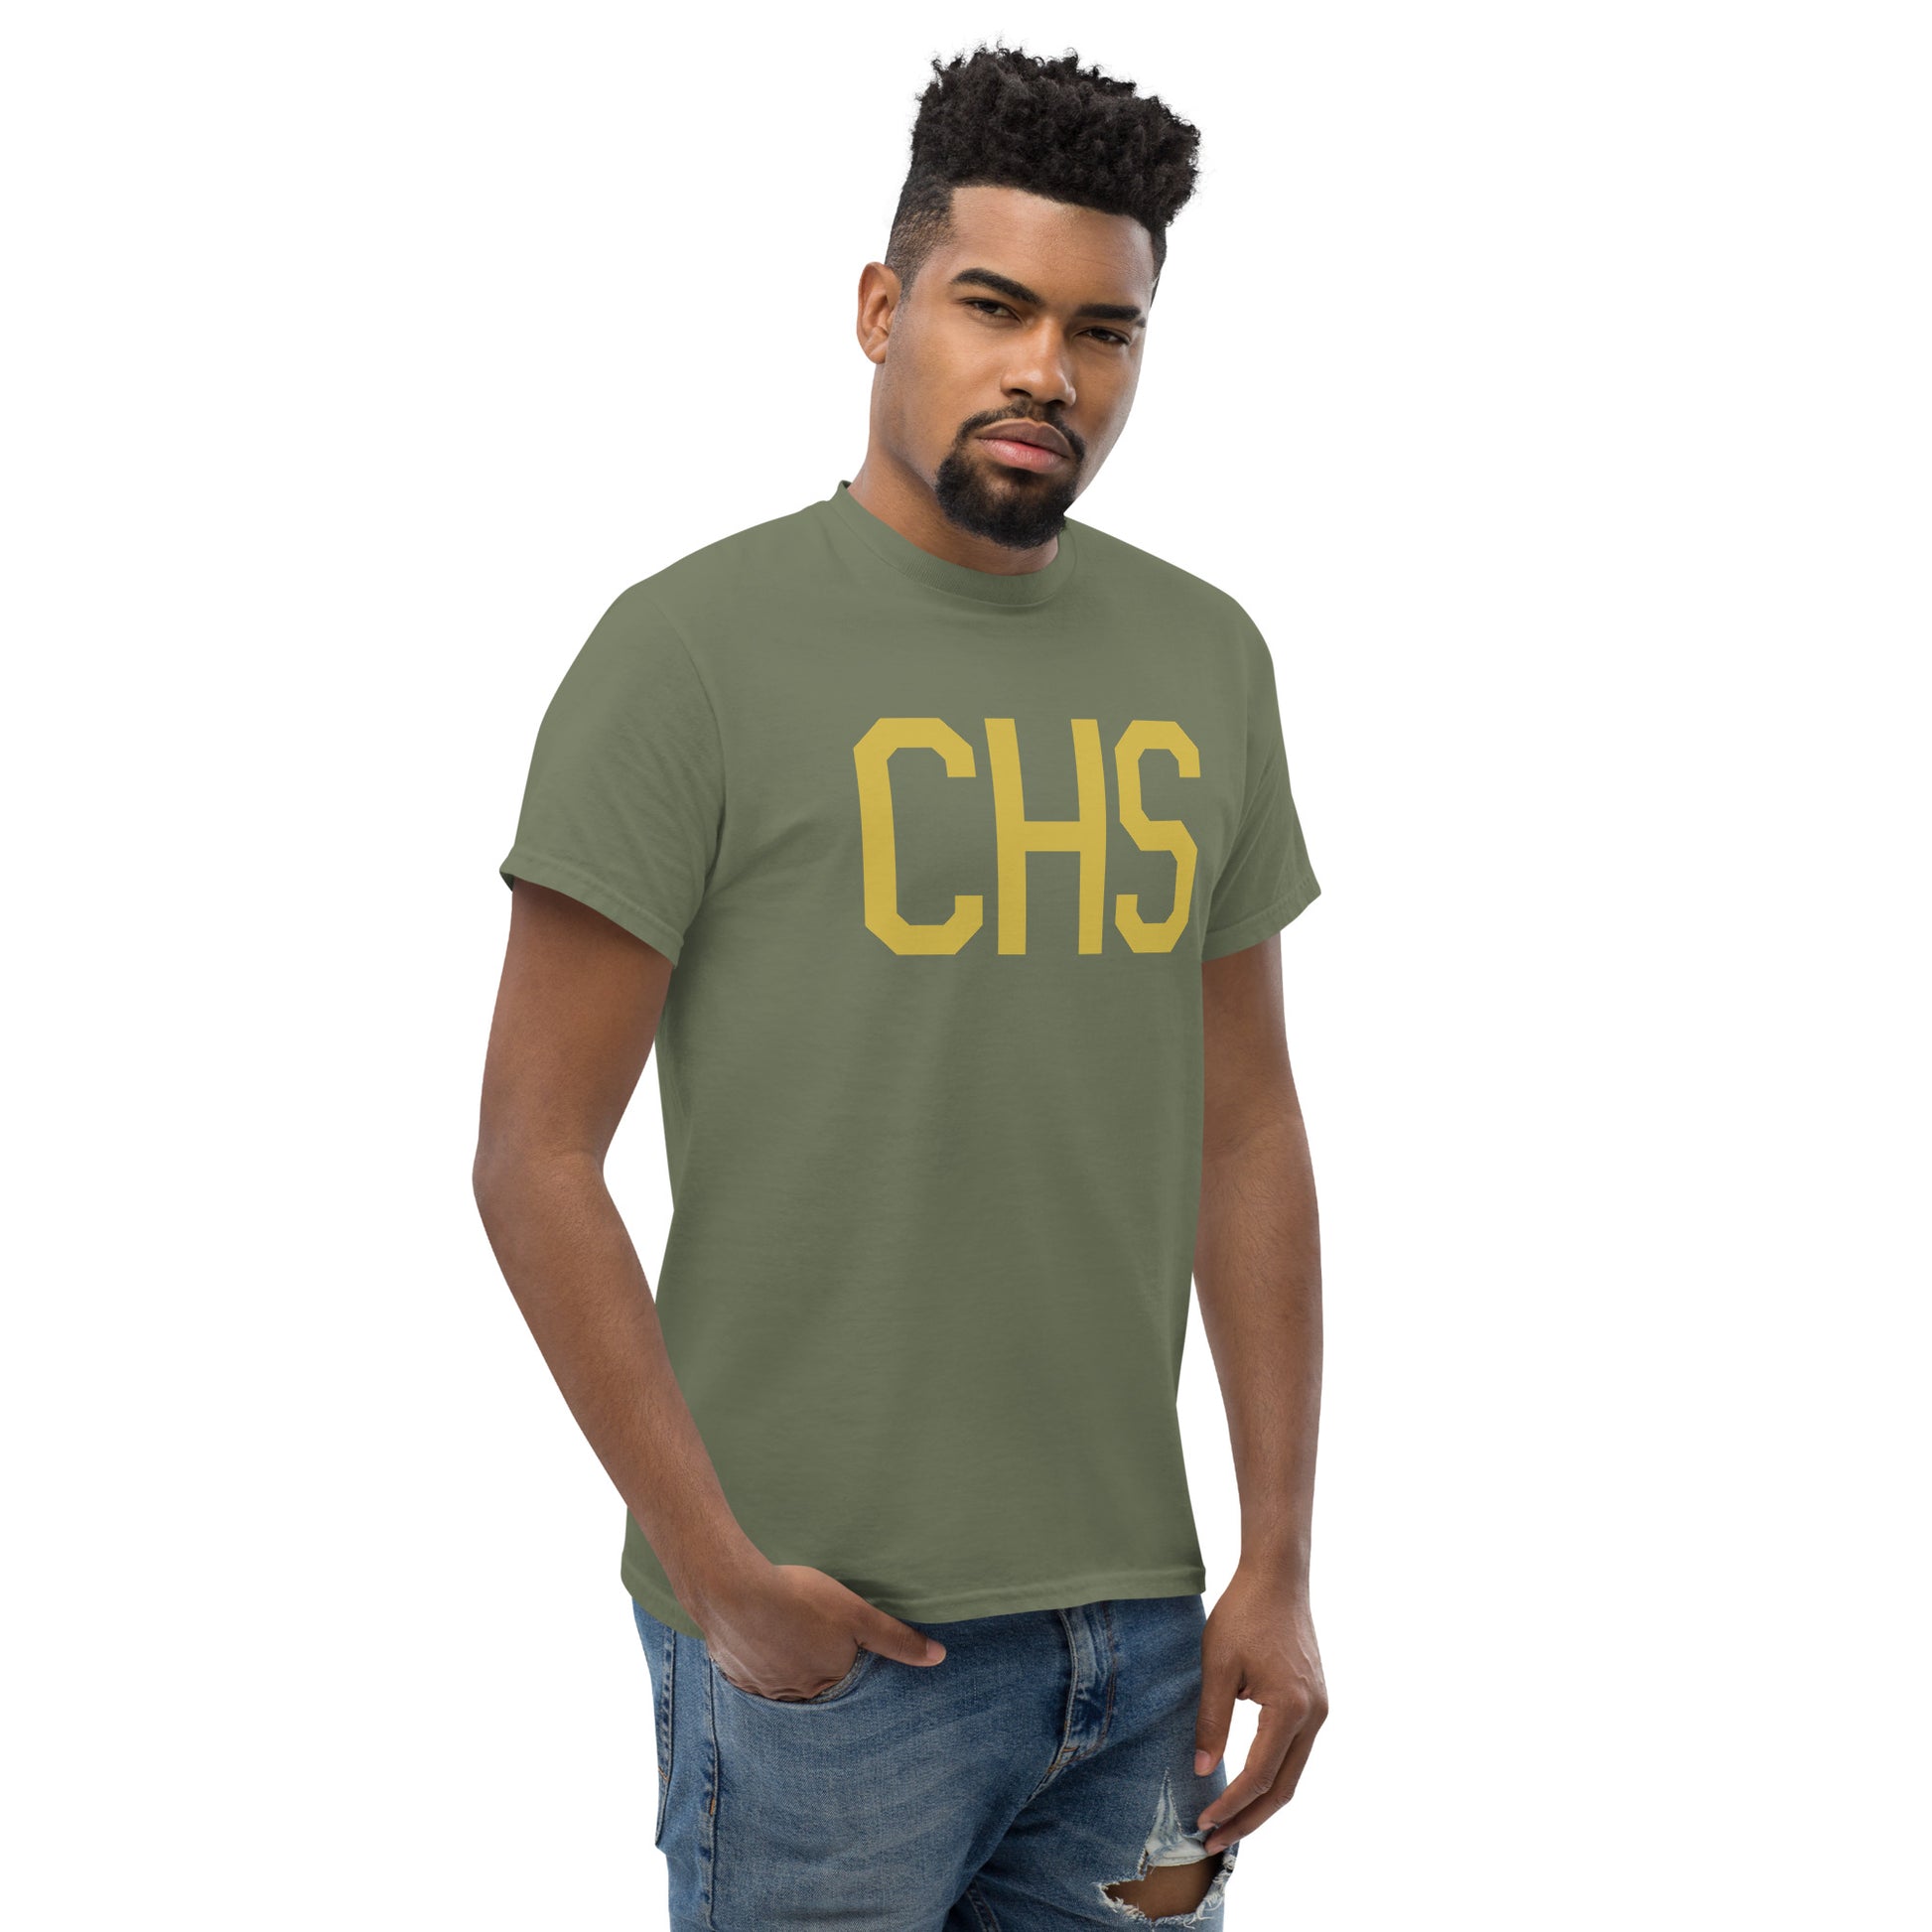 Aviation Enthusiast Men's Tee - Old Gold Graphic • CHS Charleston • YHM Designs - Image 08